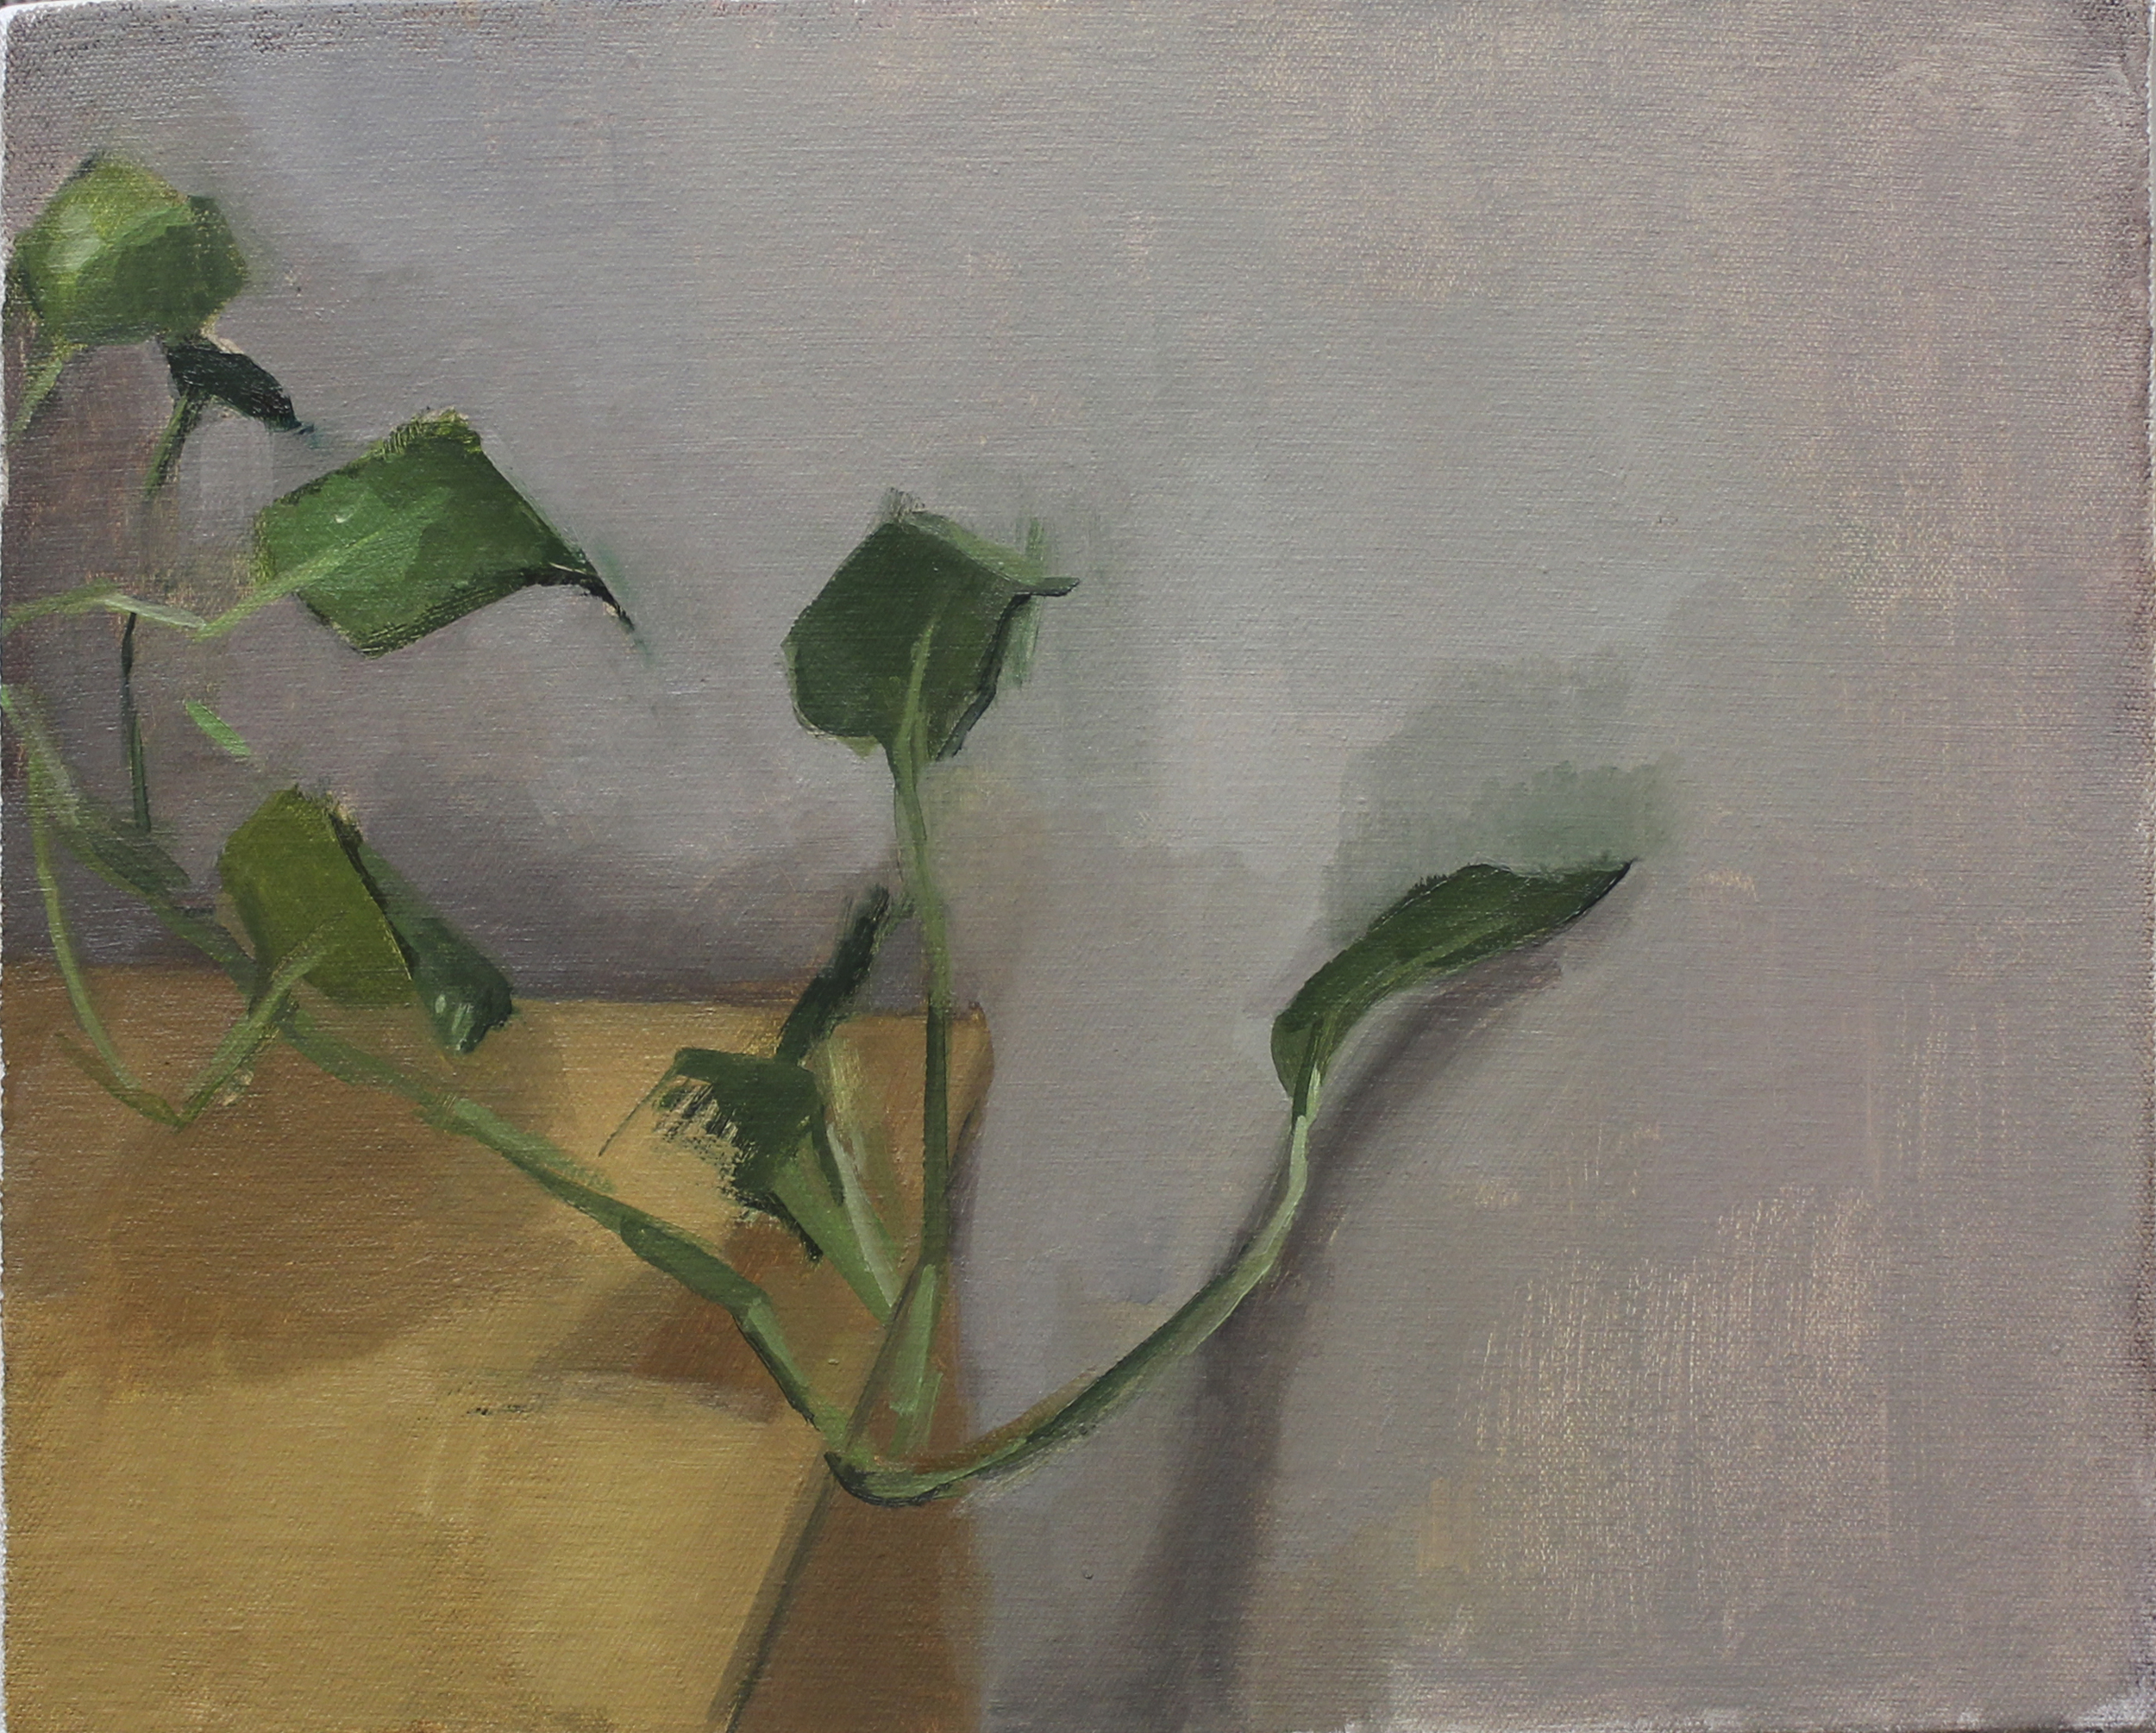    ivy     oil on canvas 11x14" 2012  private collection Los Angeles 